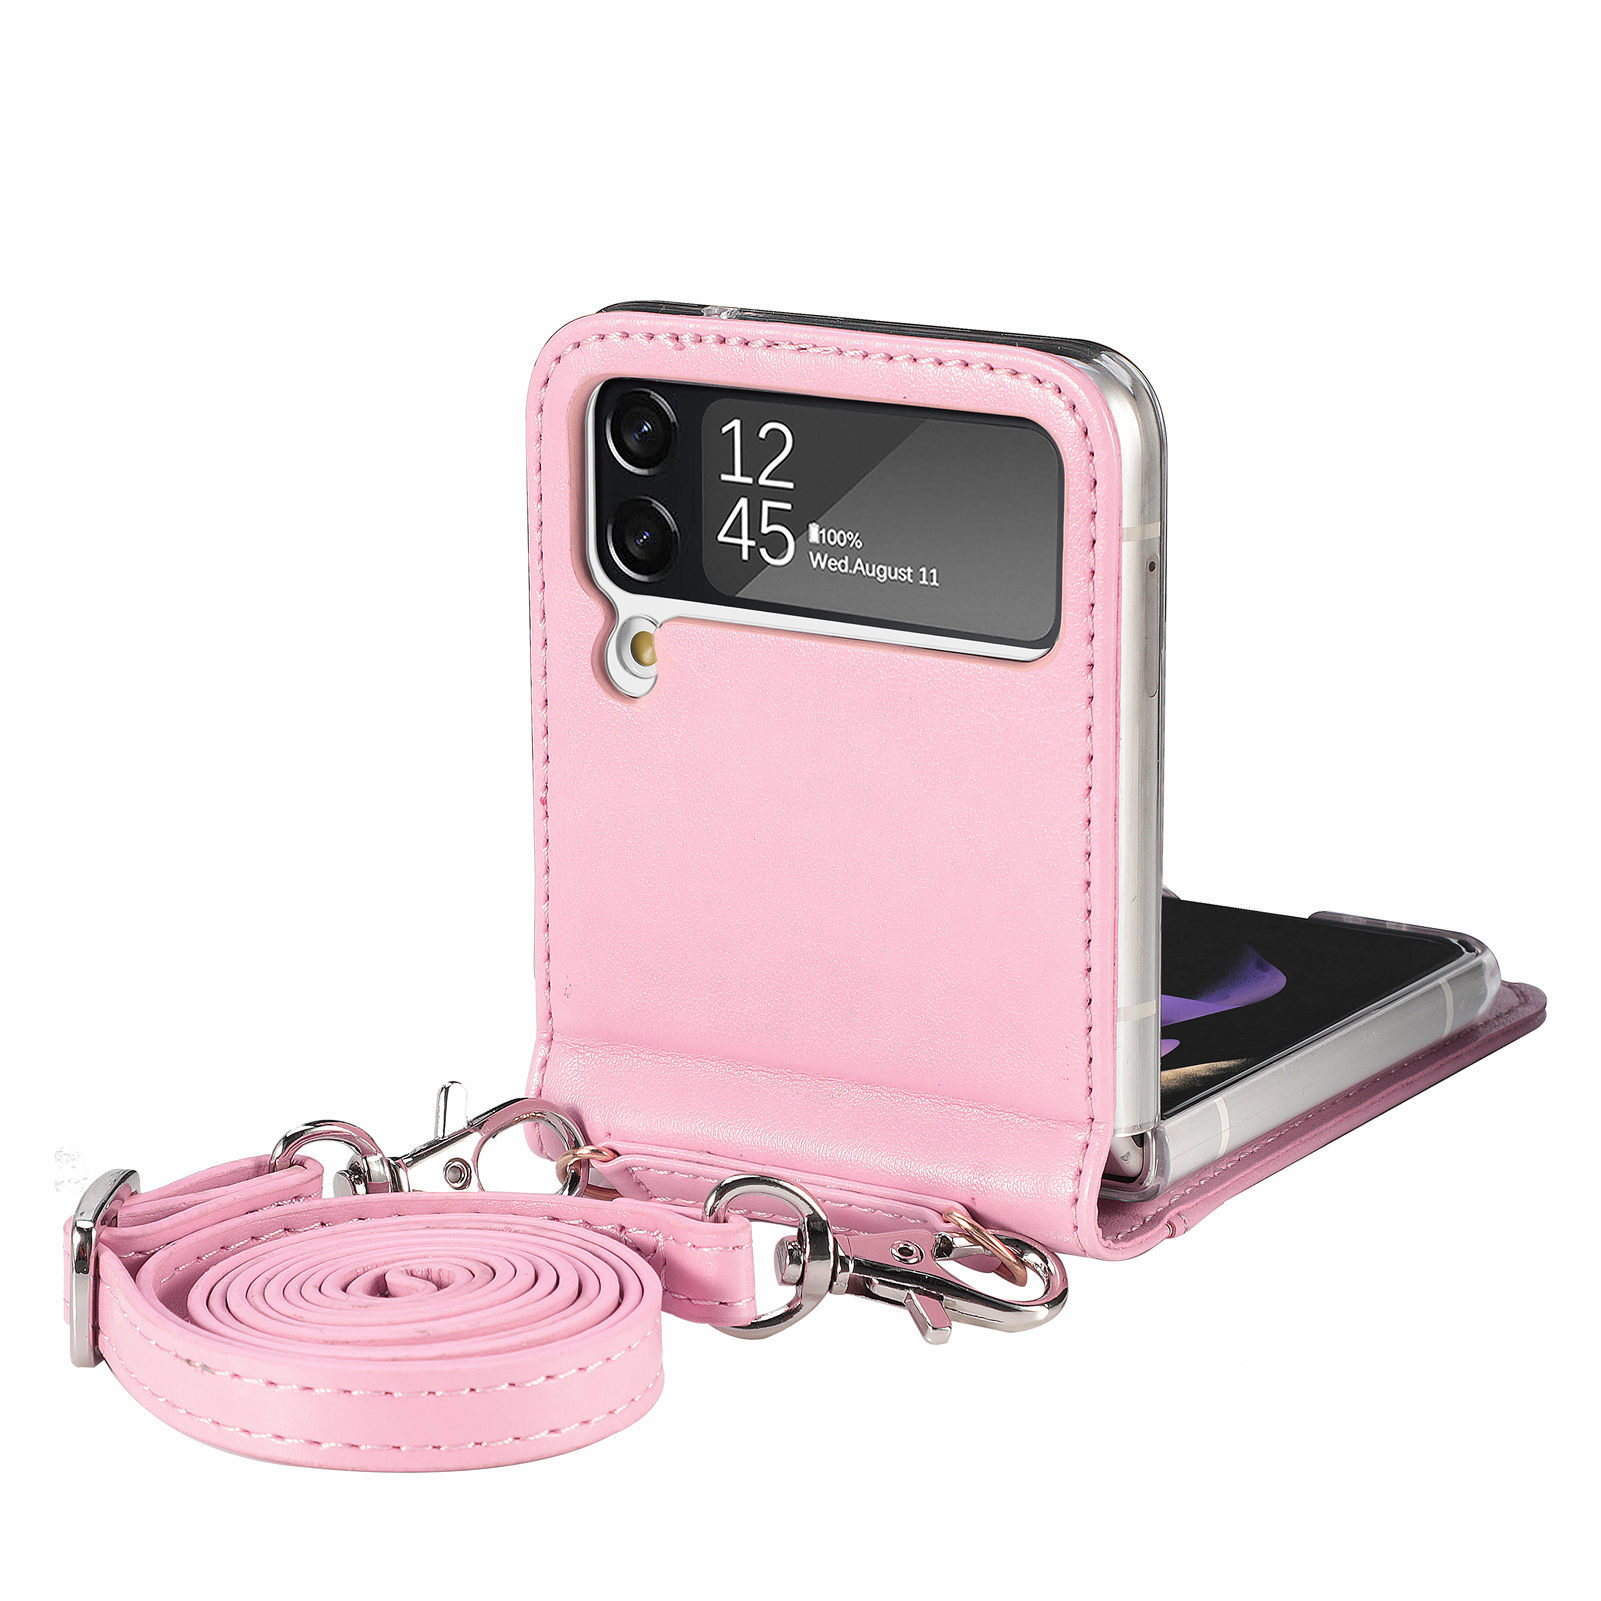 Wholesale Z Flip 3 Case Luxury Lanyard Card Holder Cellphone Cover Soft  leather PU Miss Phone Case For Samsung Galaxy Z Flip3 case From  m.